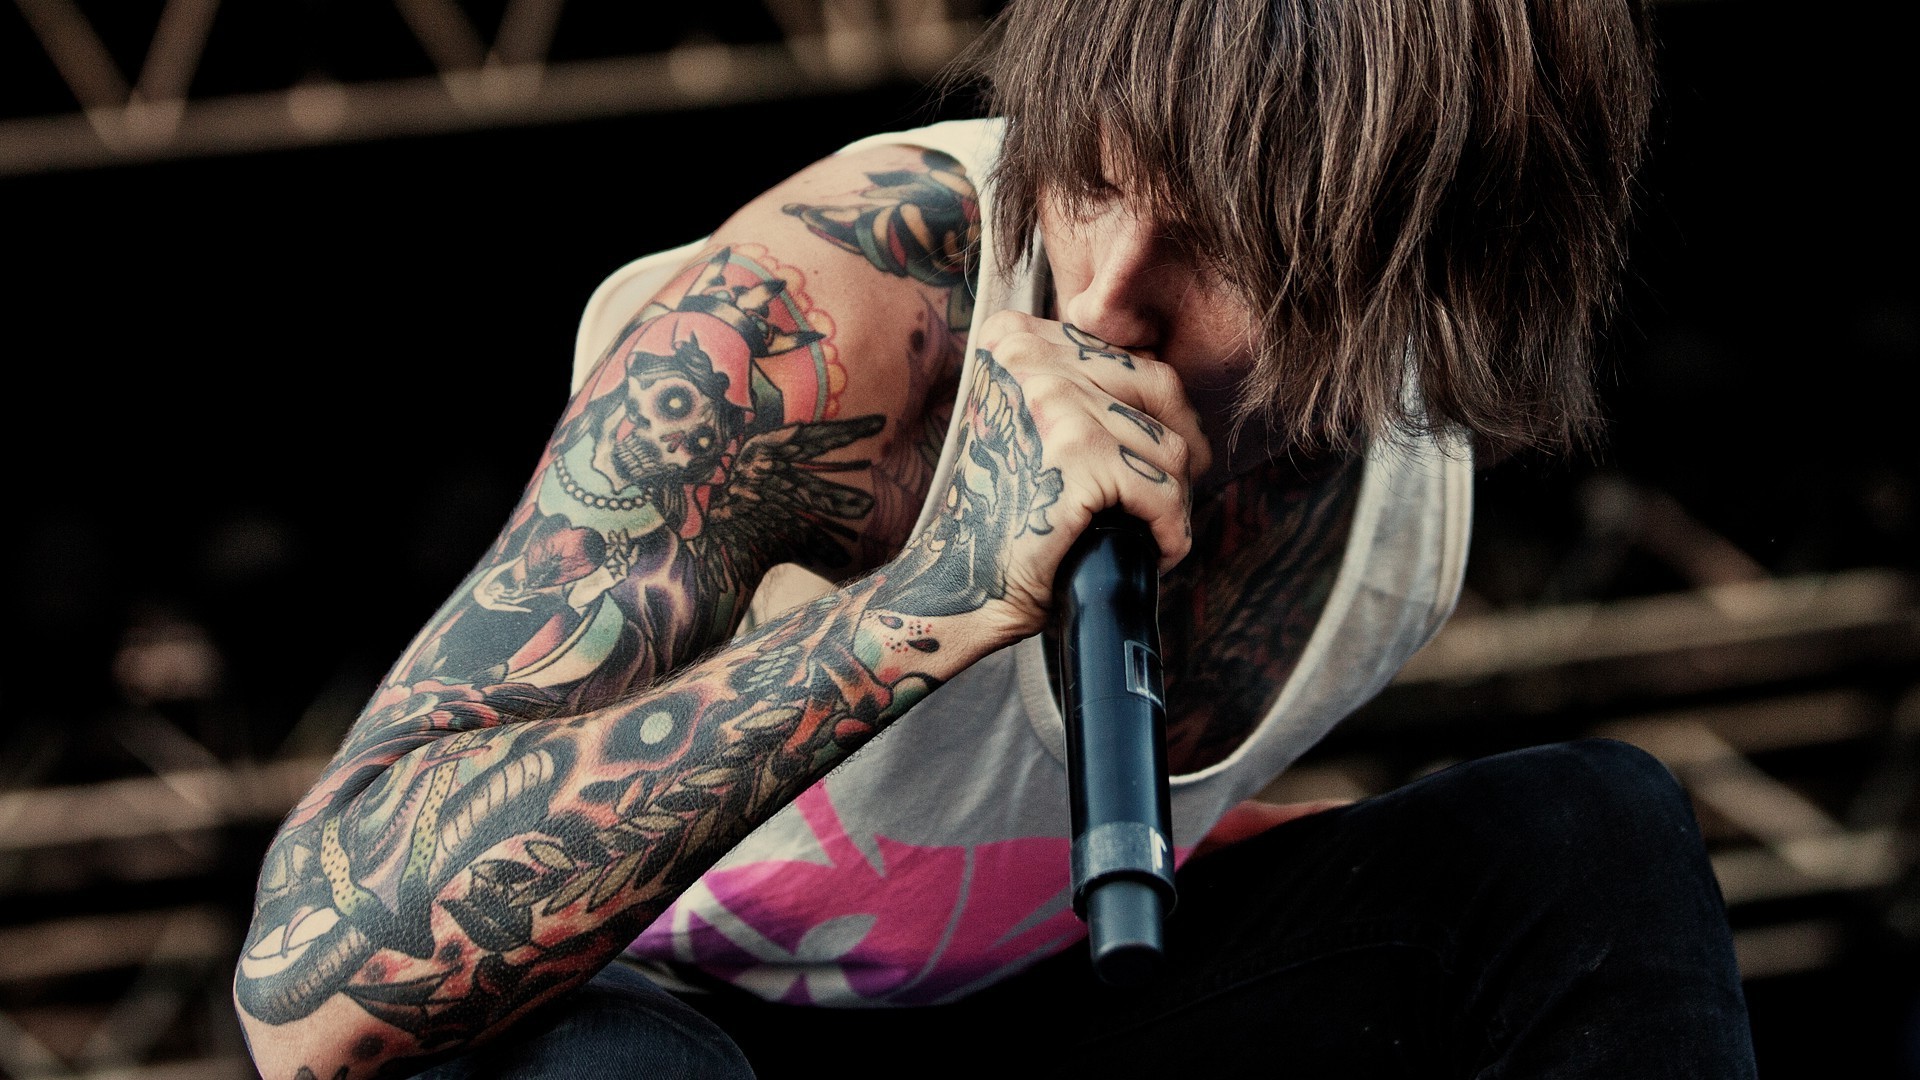 music, Oliver Sykes, Bring Me The Horizon Wallpaper